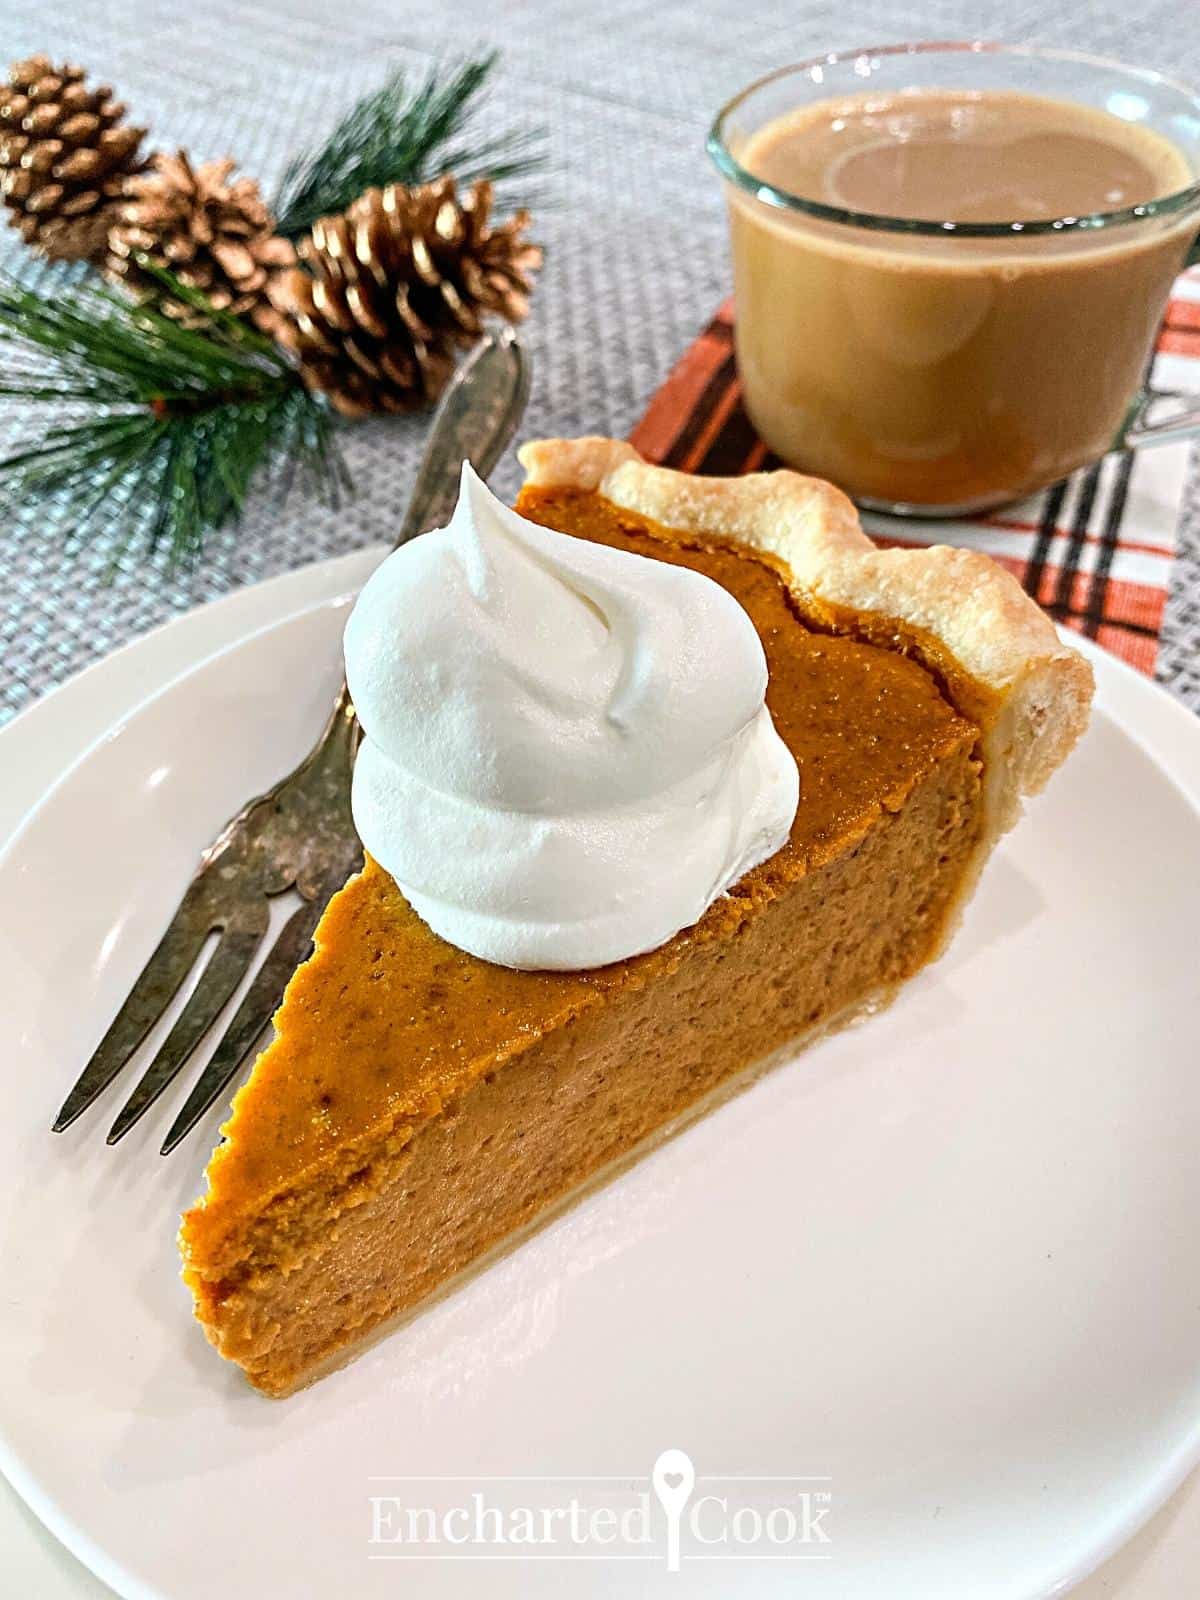 A slice of pumpkin pie on a white plate with a cup of coffee and a pine cone decoration in the background.